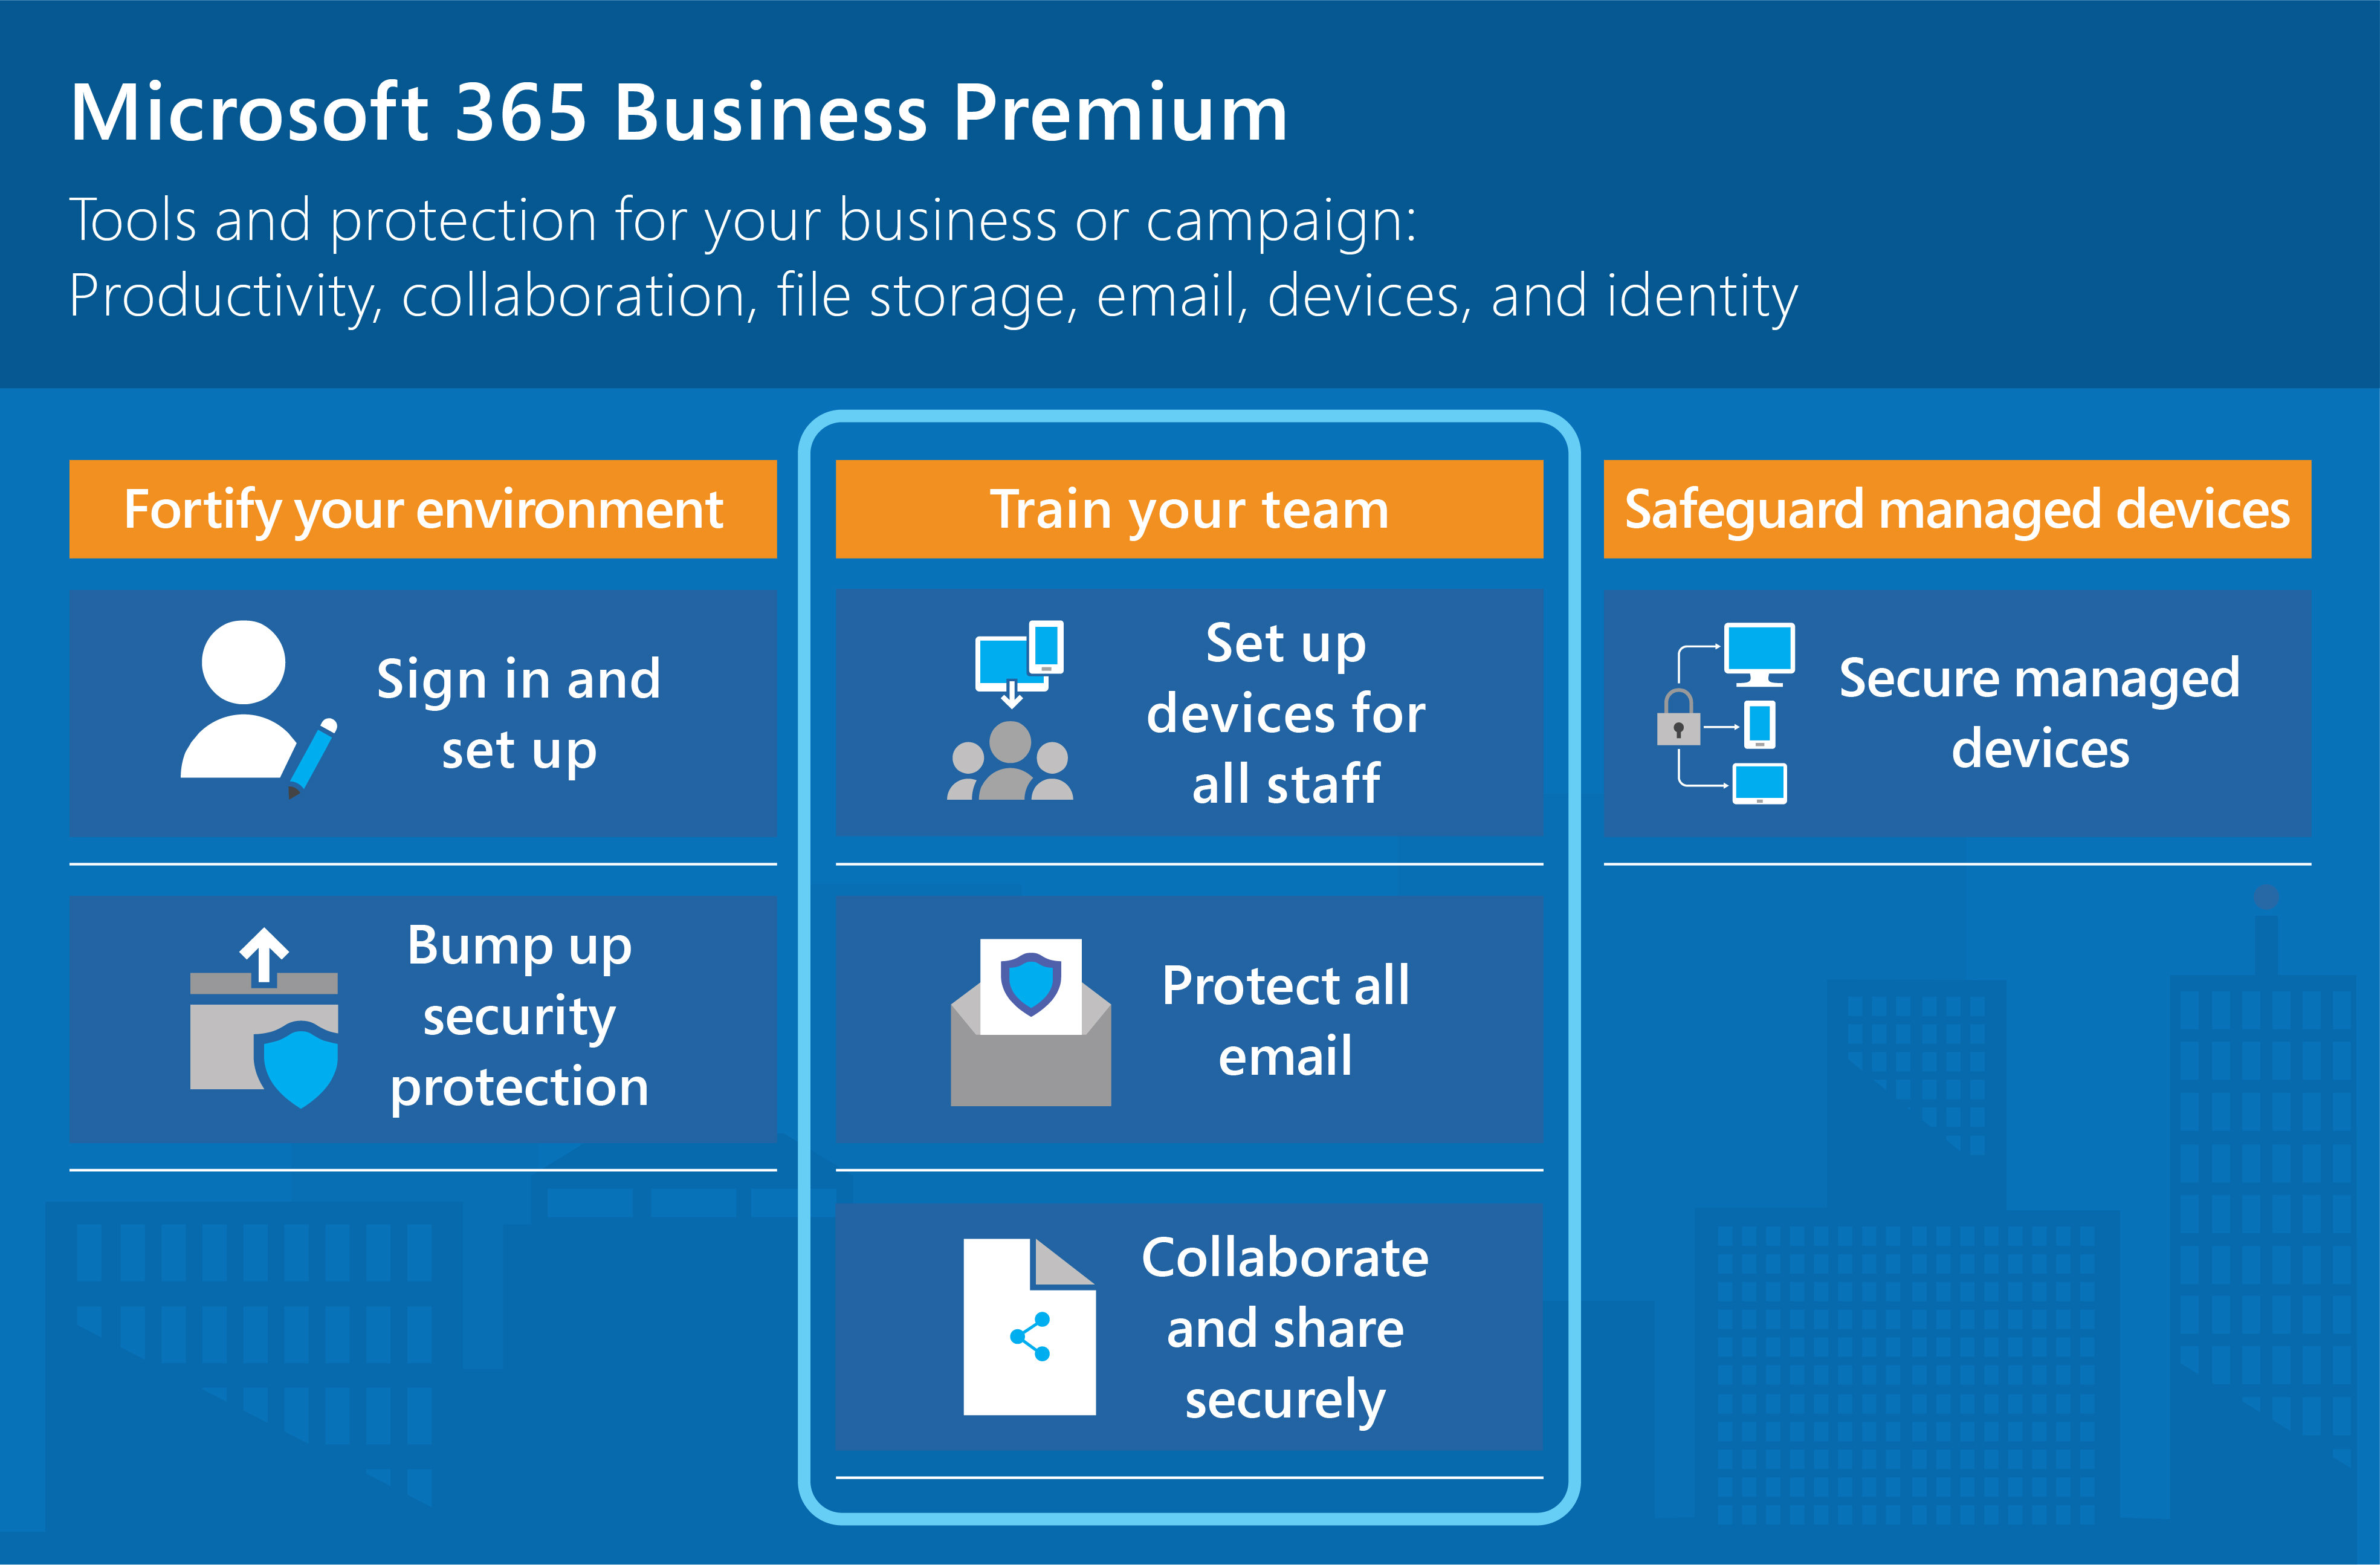 Microsoft 365 Business Premium protects your apps, file storage, email, devices, and identities.